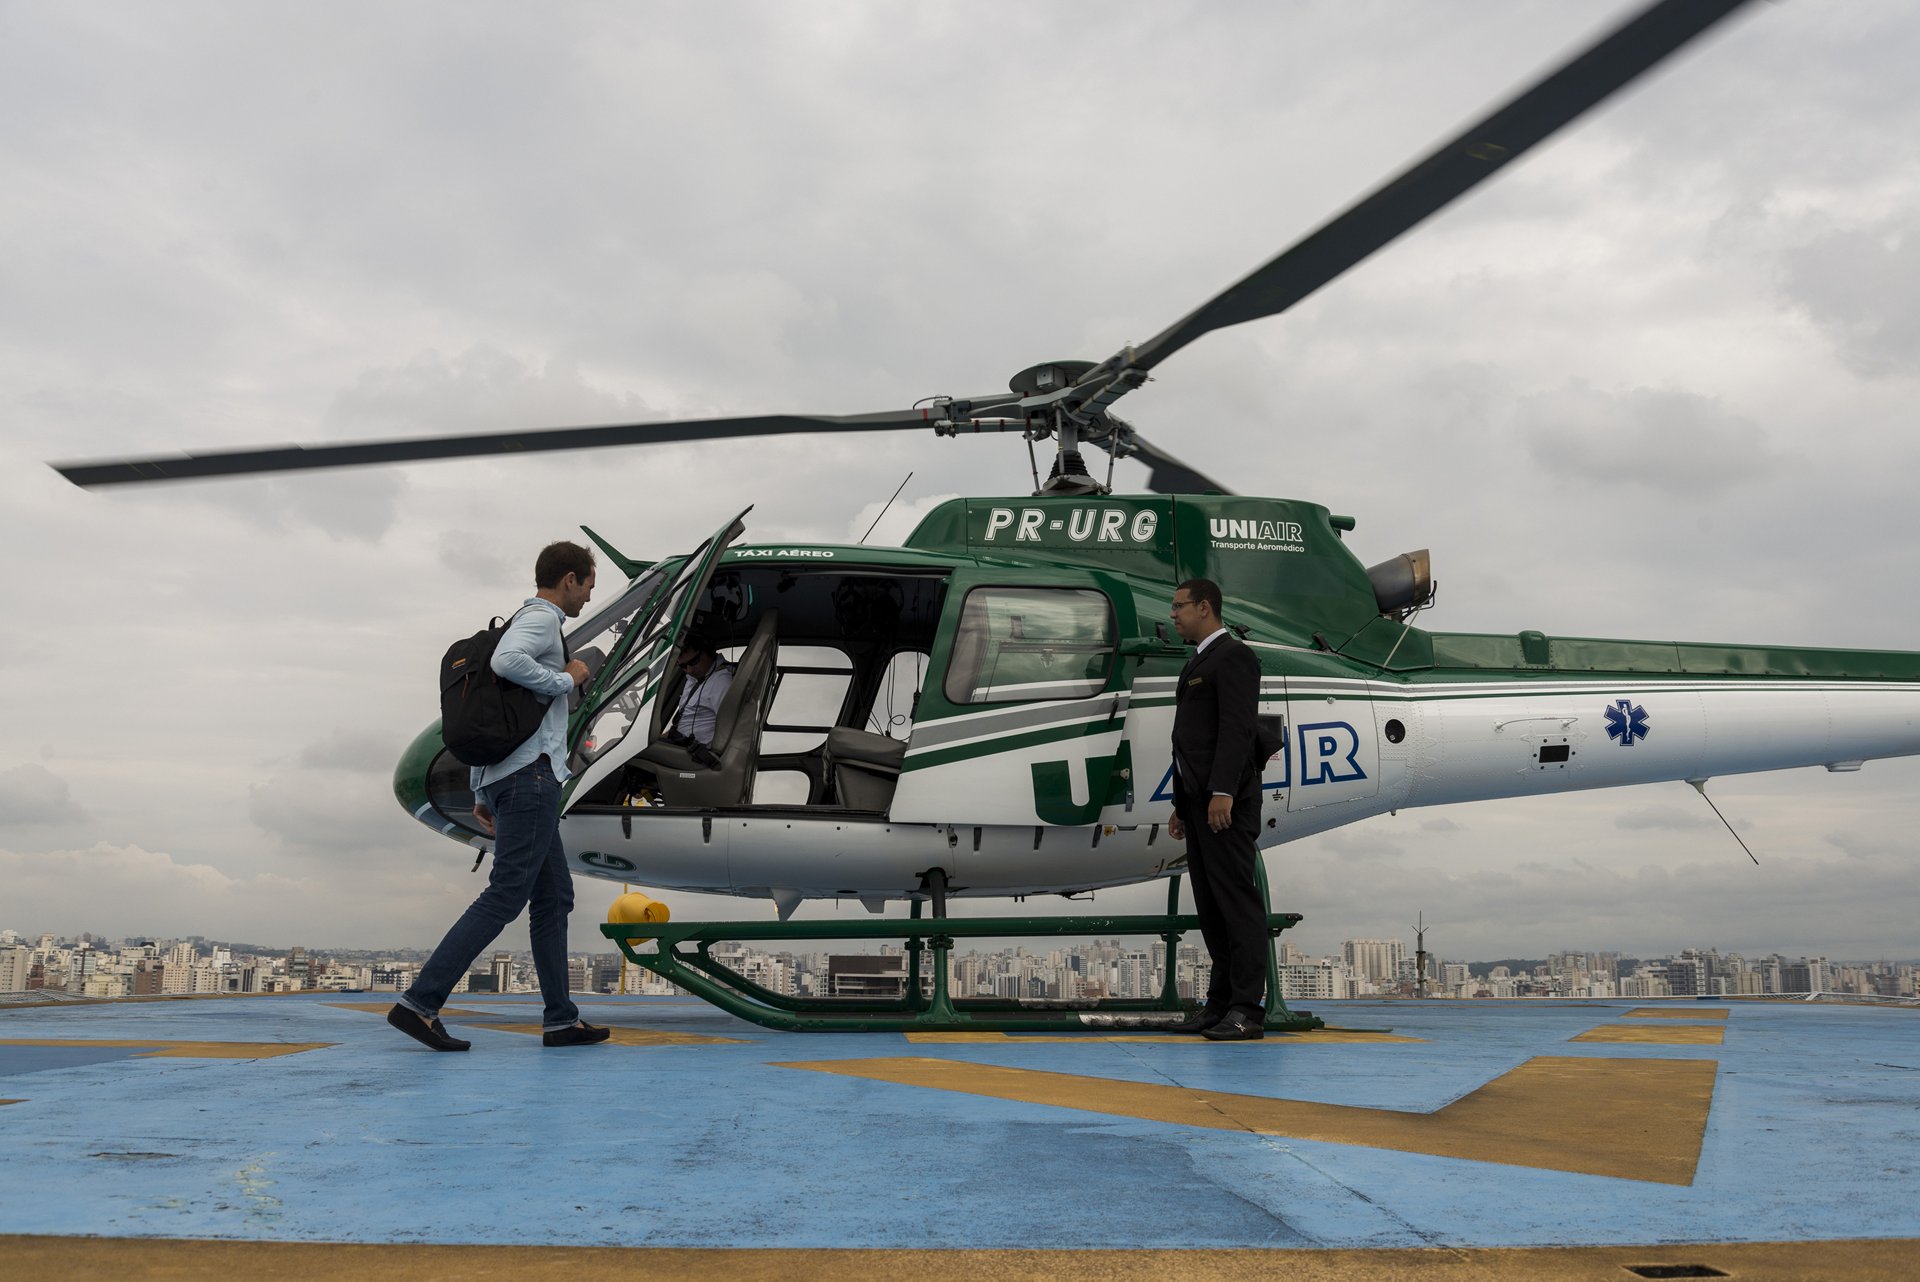 Voom joins Airbus Helicopters